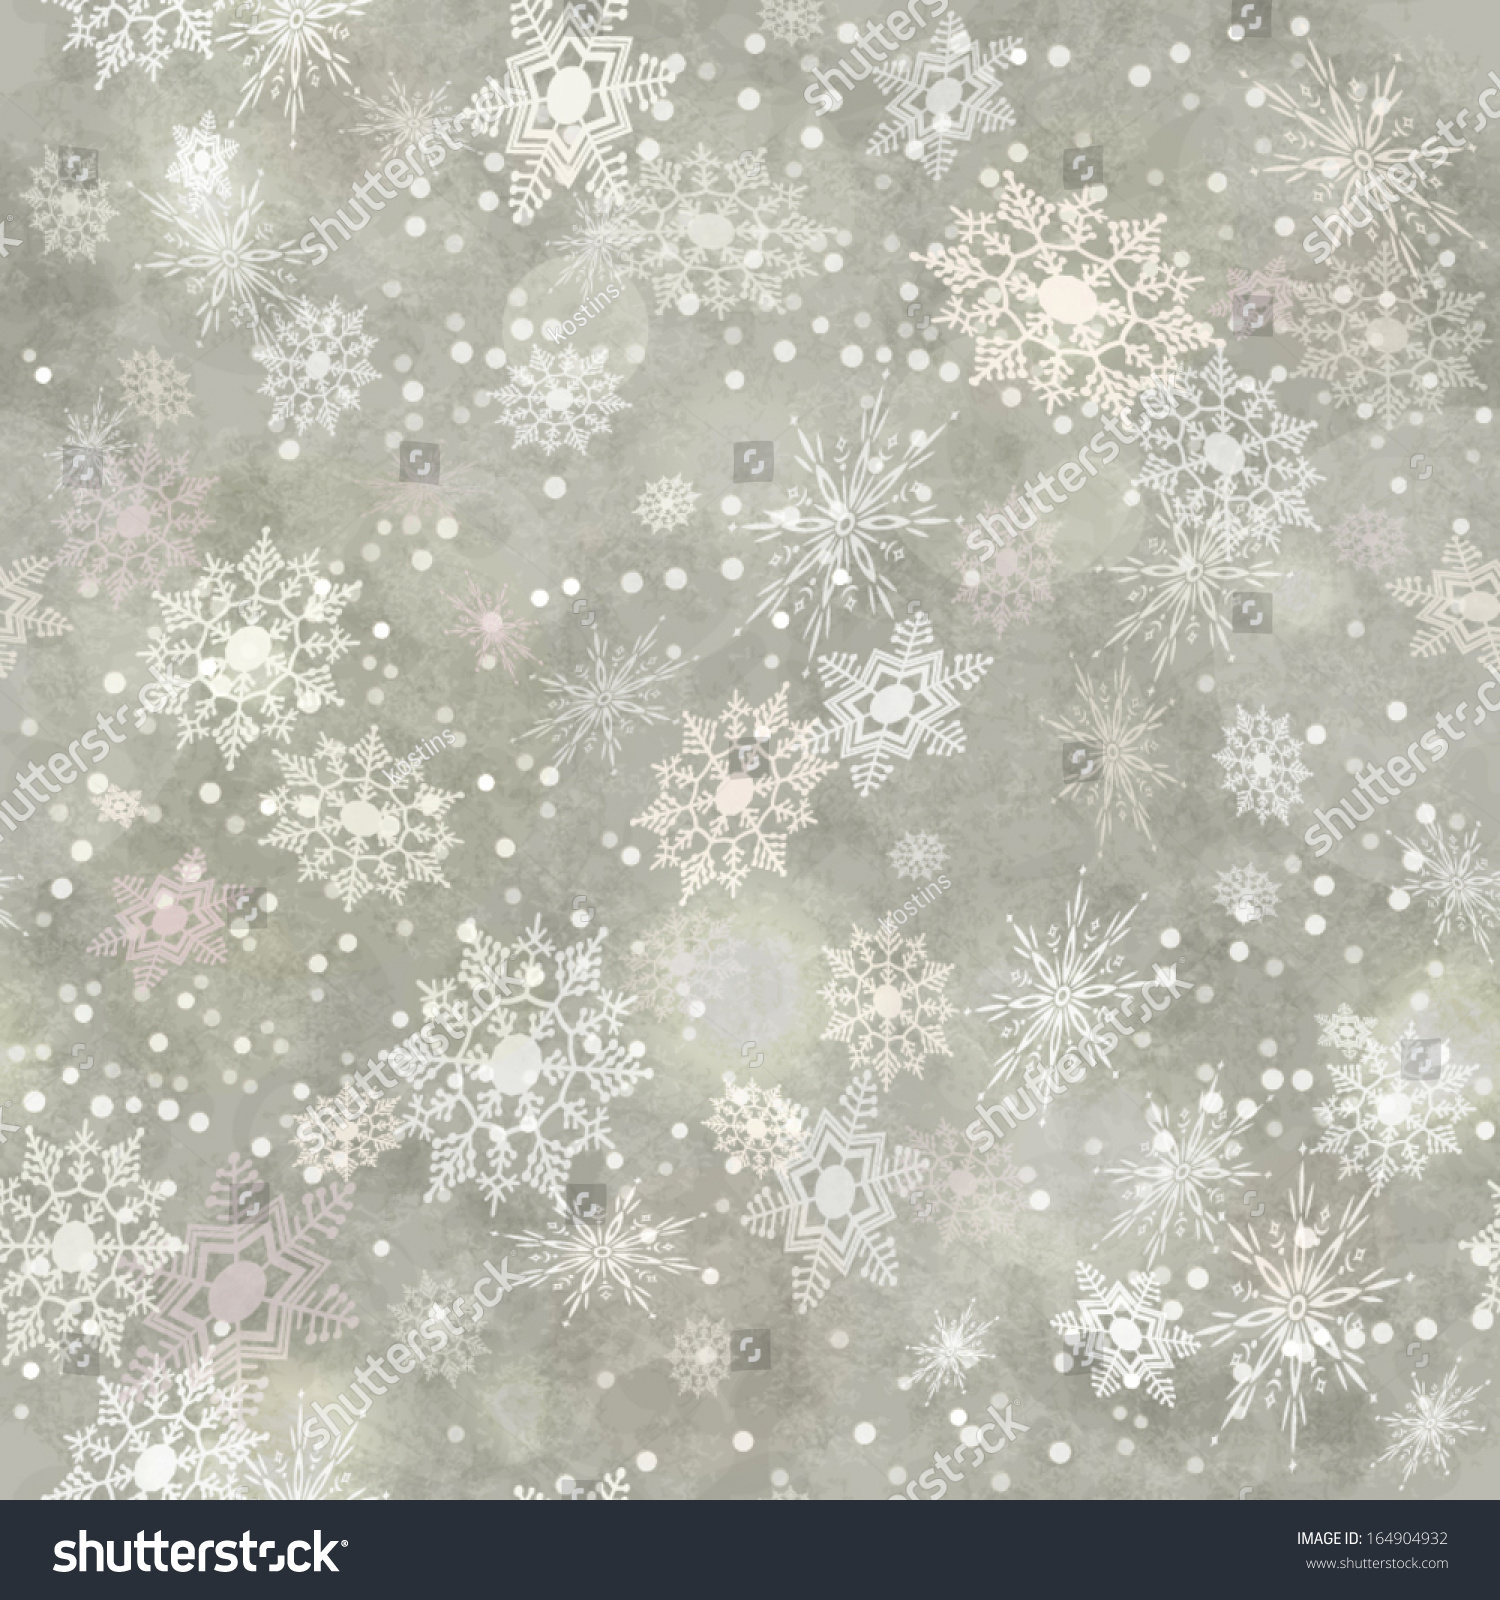 Wrapping Christmas Vintage Paper Background Snowflake Stock Vector ...